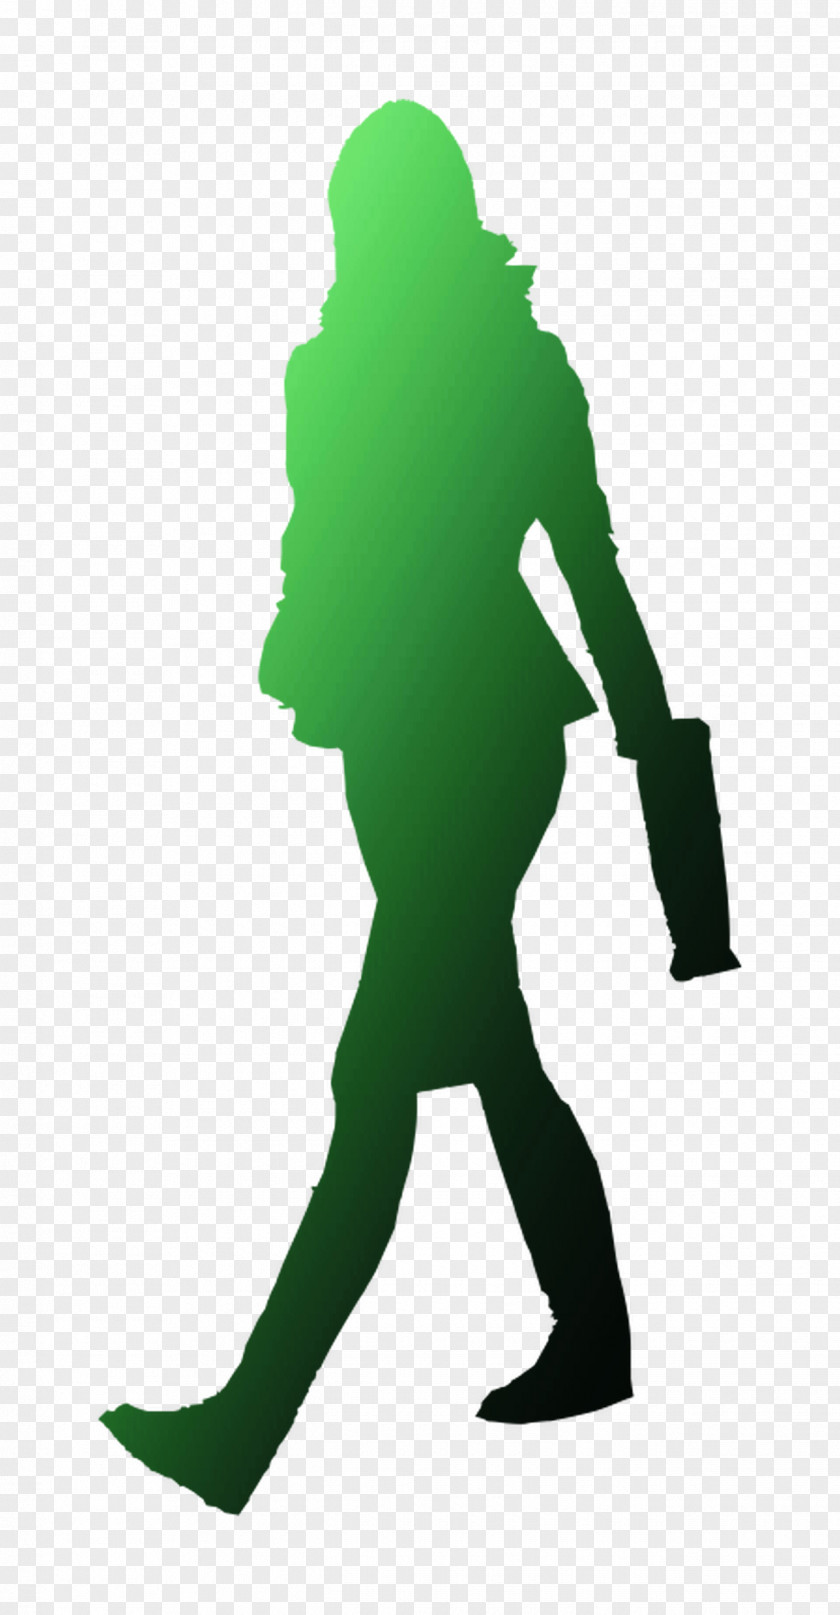 Human Behavior Character Product Design Silhouette PNG